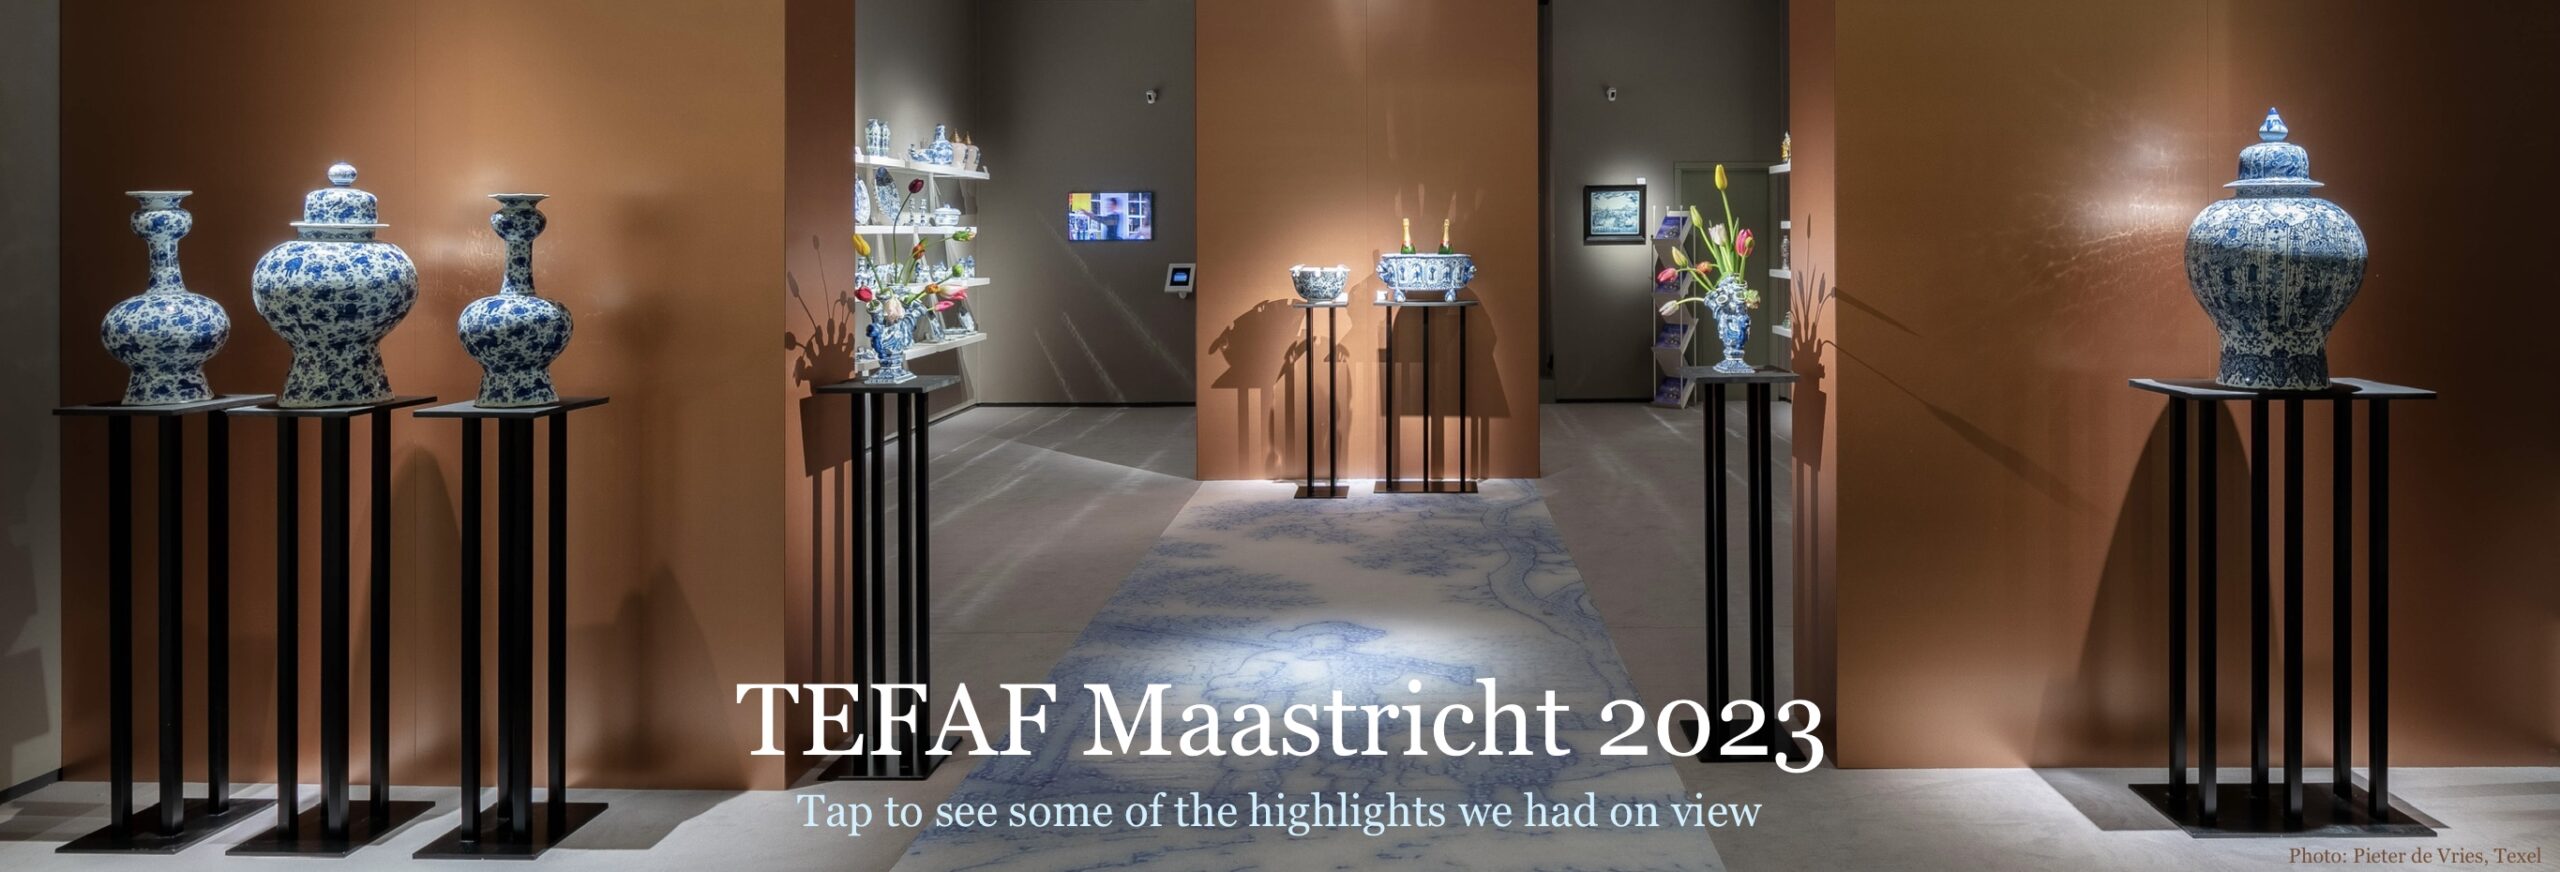 View of stand at TEFAF Maastricht 2023